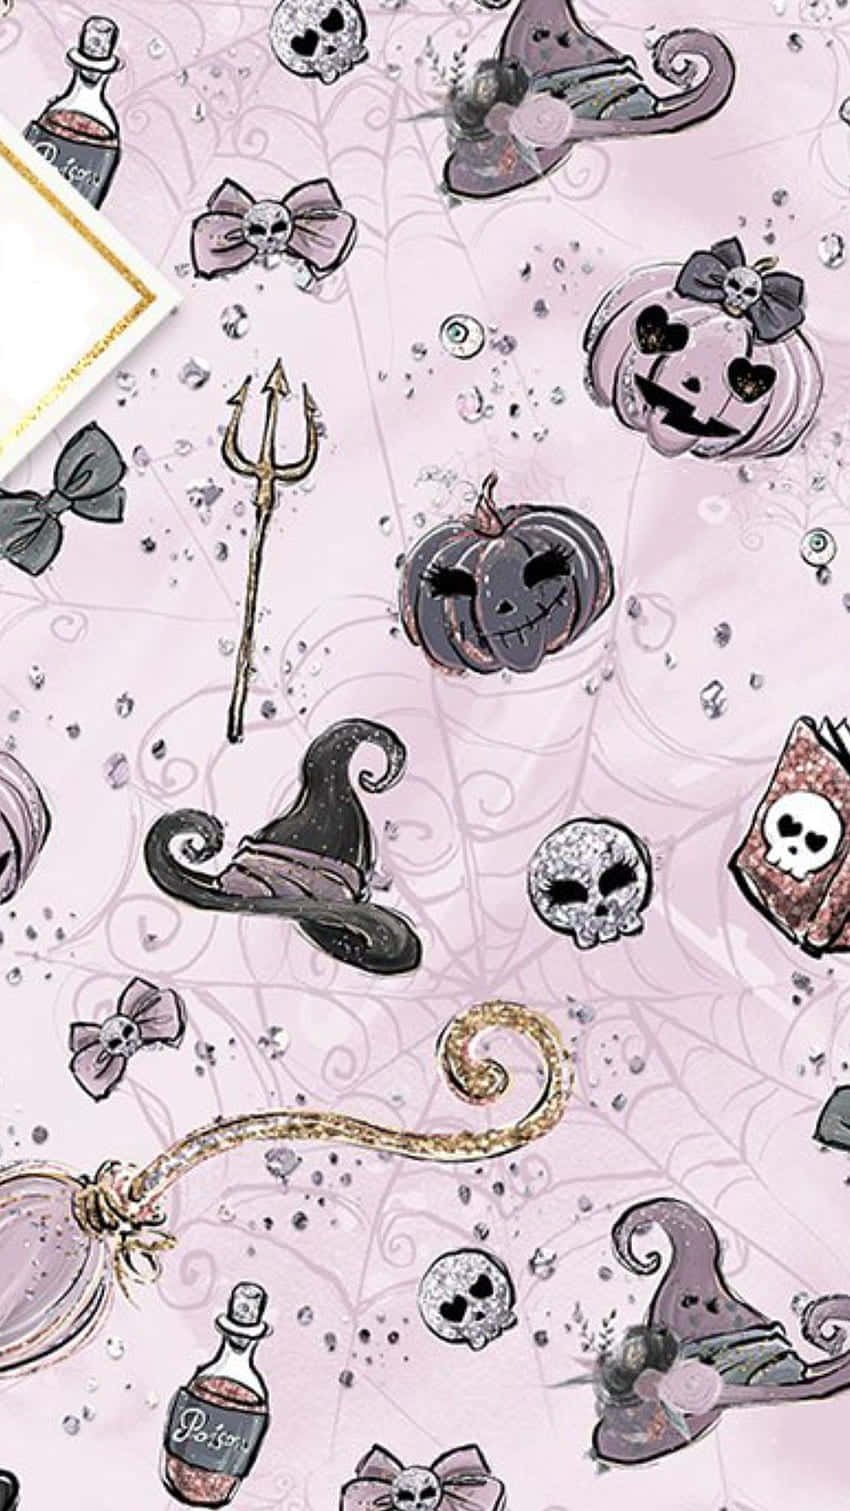 Adorable Witchcraft - A Vibrant Fusion of Cute and Spooky Wallpaper